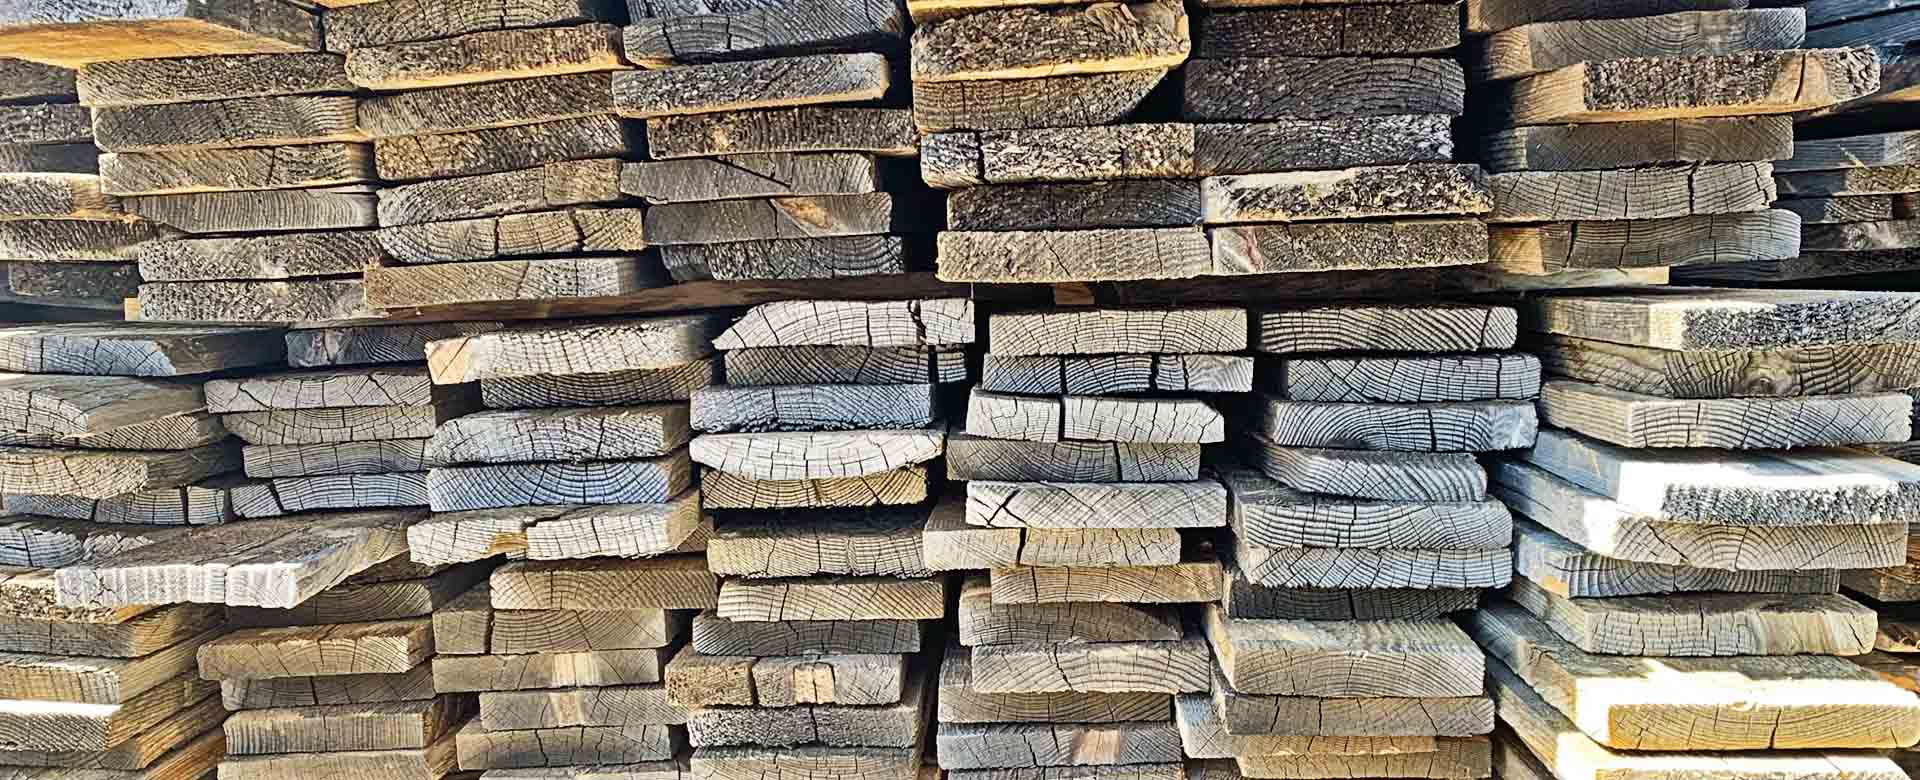 How To Stack Wood In Fireplace